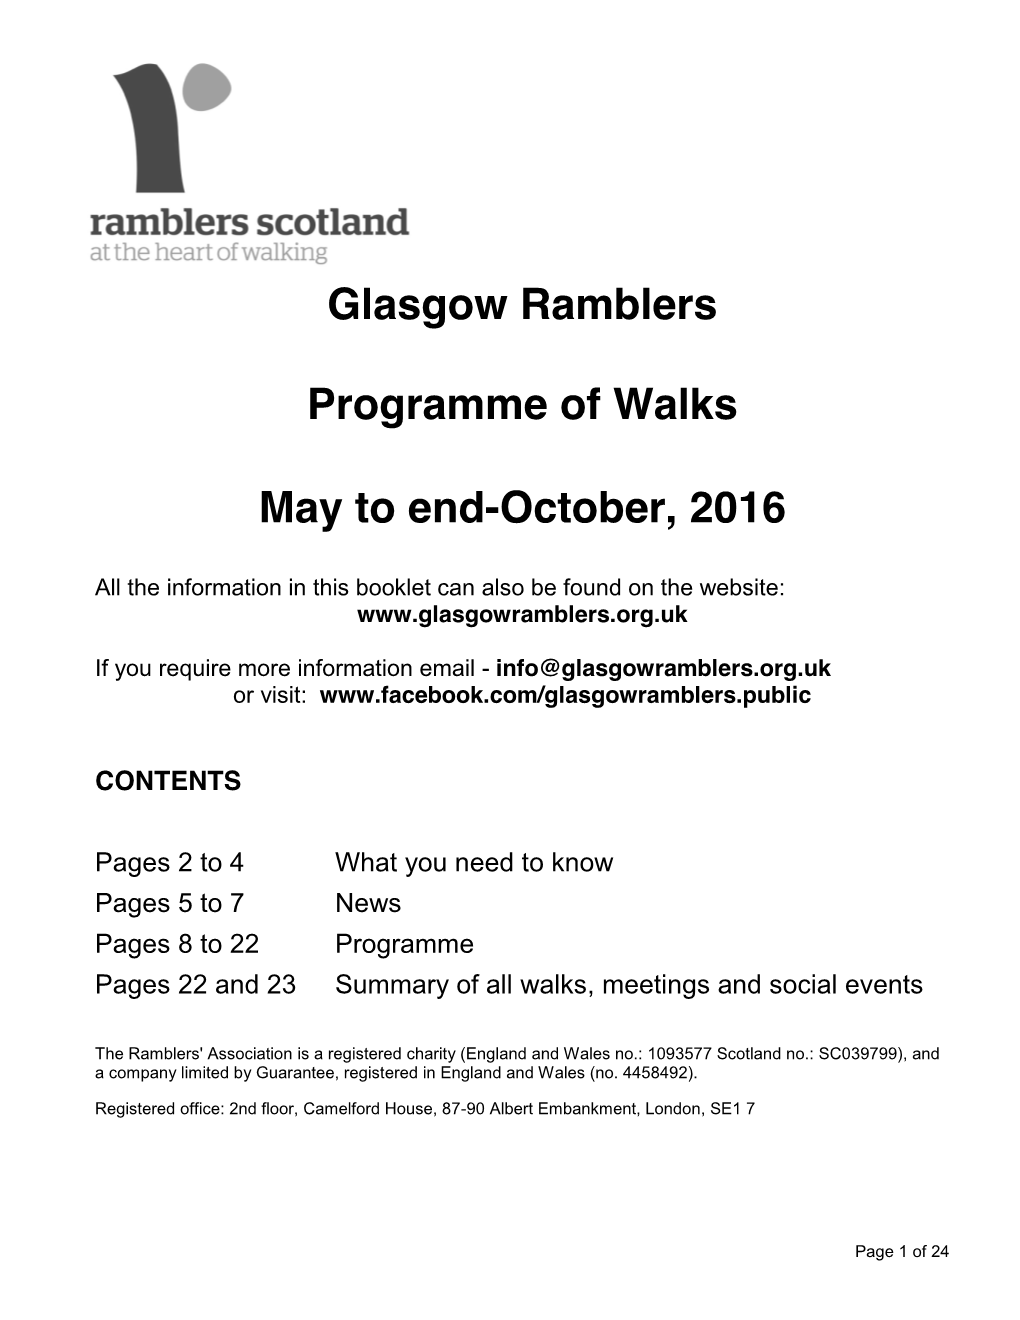 Glasgow Ramblers Programme of Walks May to End-October, 2016